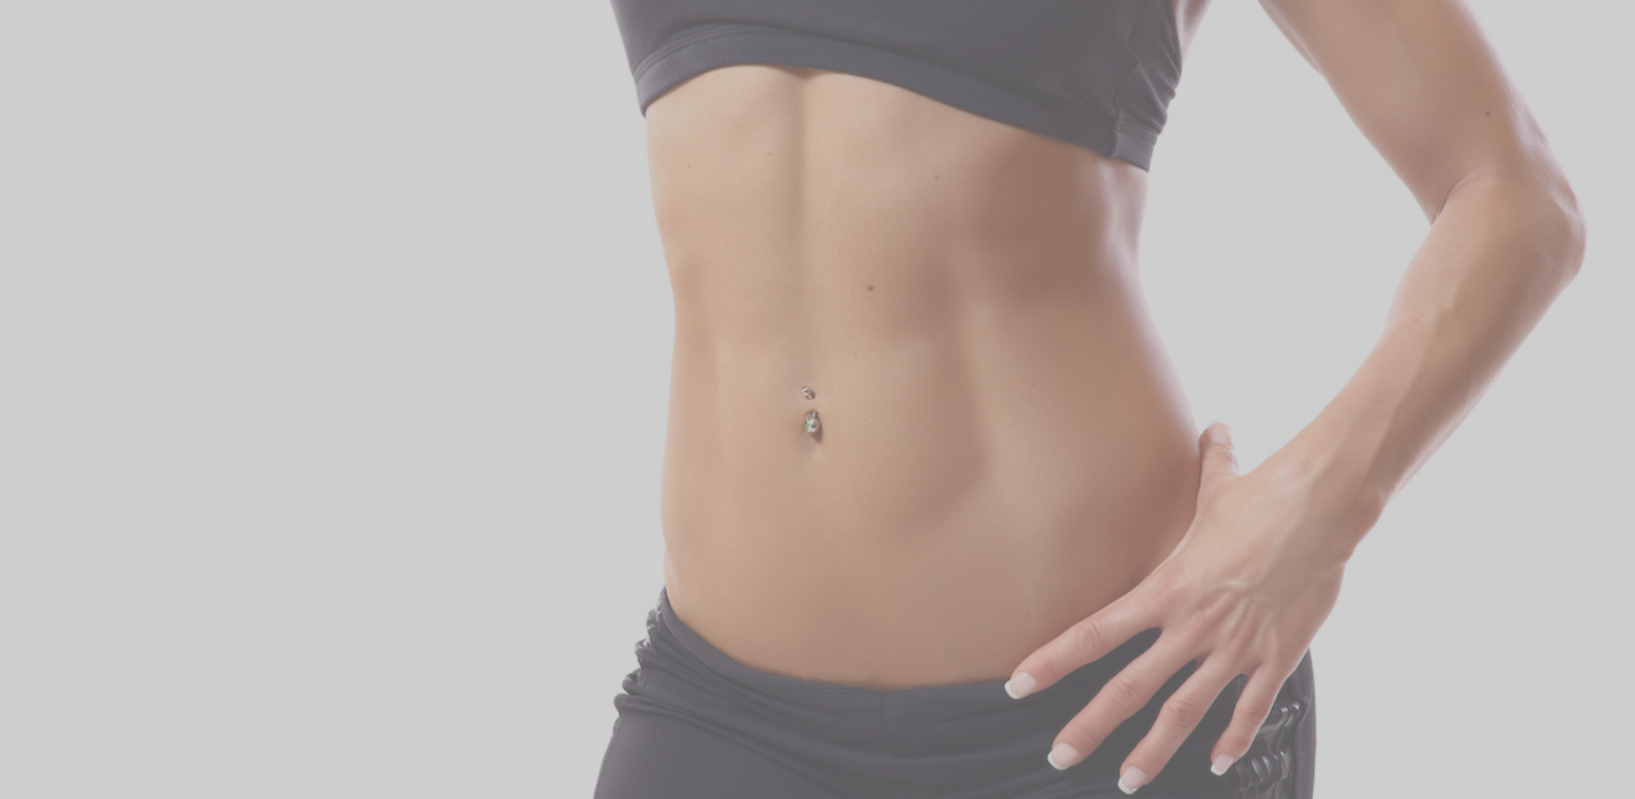 Body Contouring with High Definition Liposuction